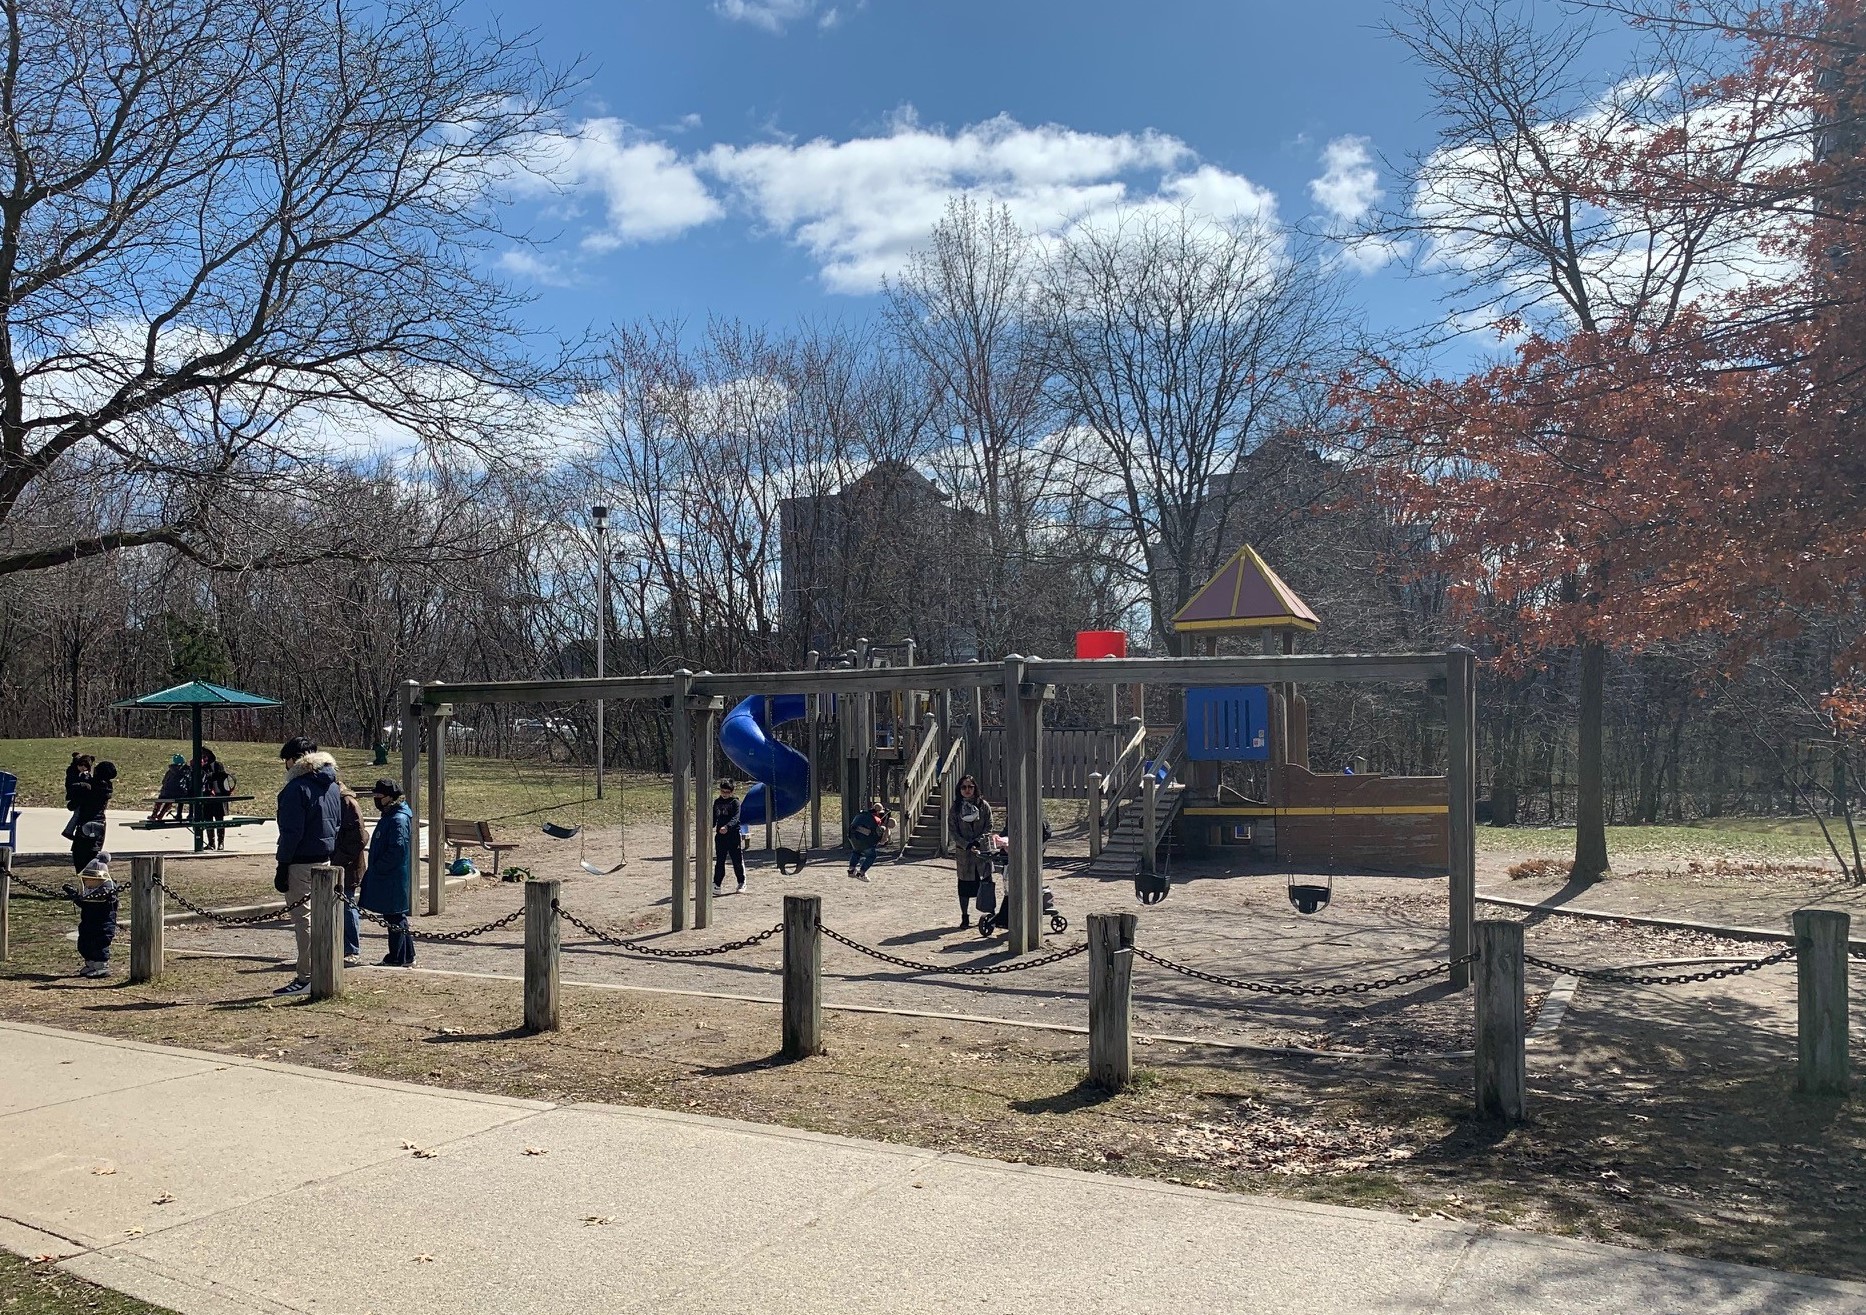 A photograph of the playground taken on a sunny winter day. The playground has post chain fencing on one side parallel to the three swing sets on top of sand play surfacing. 